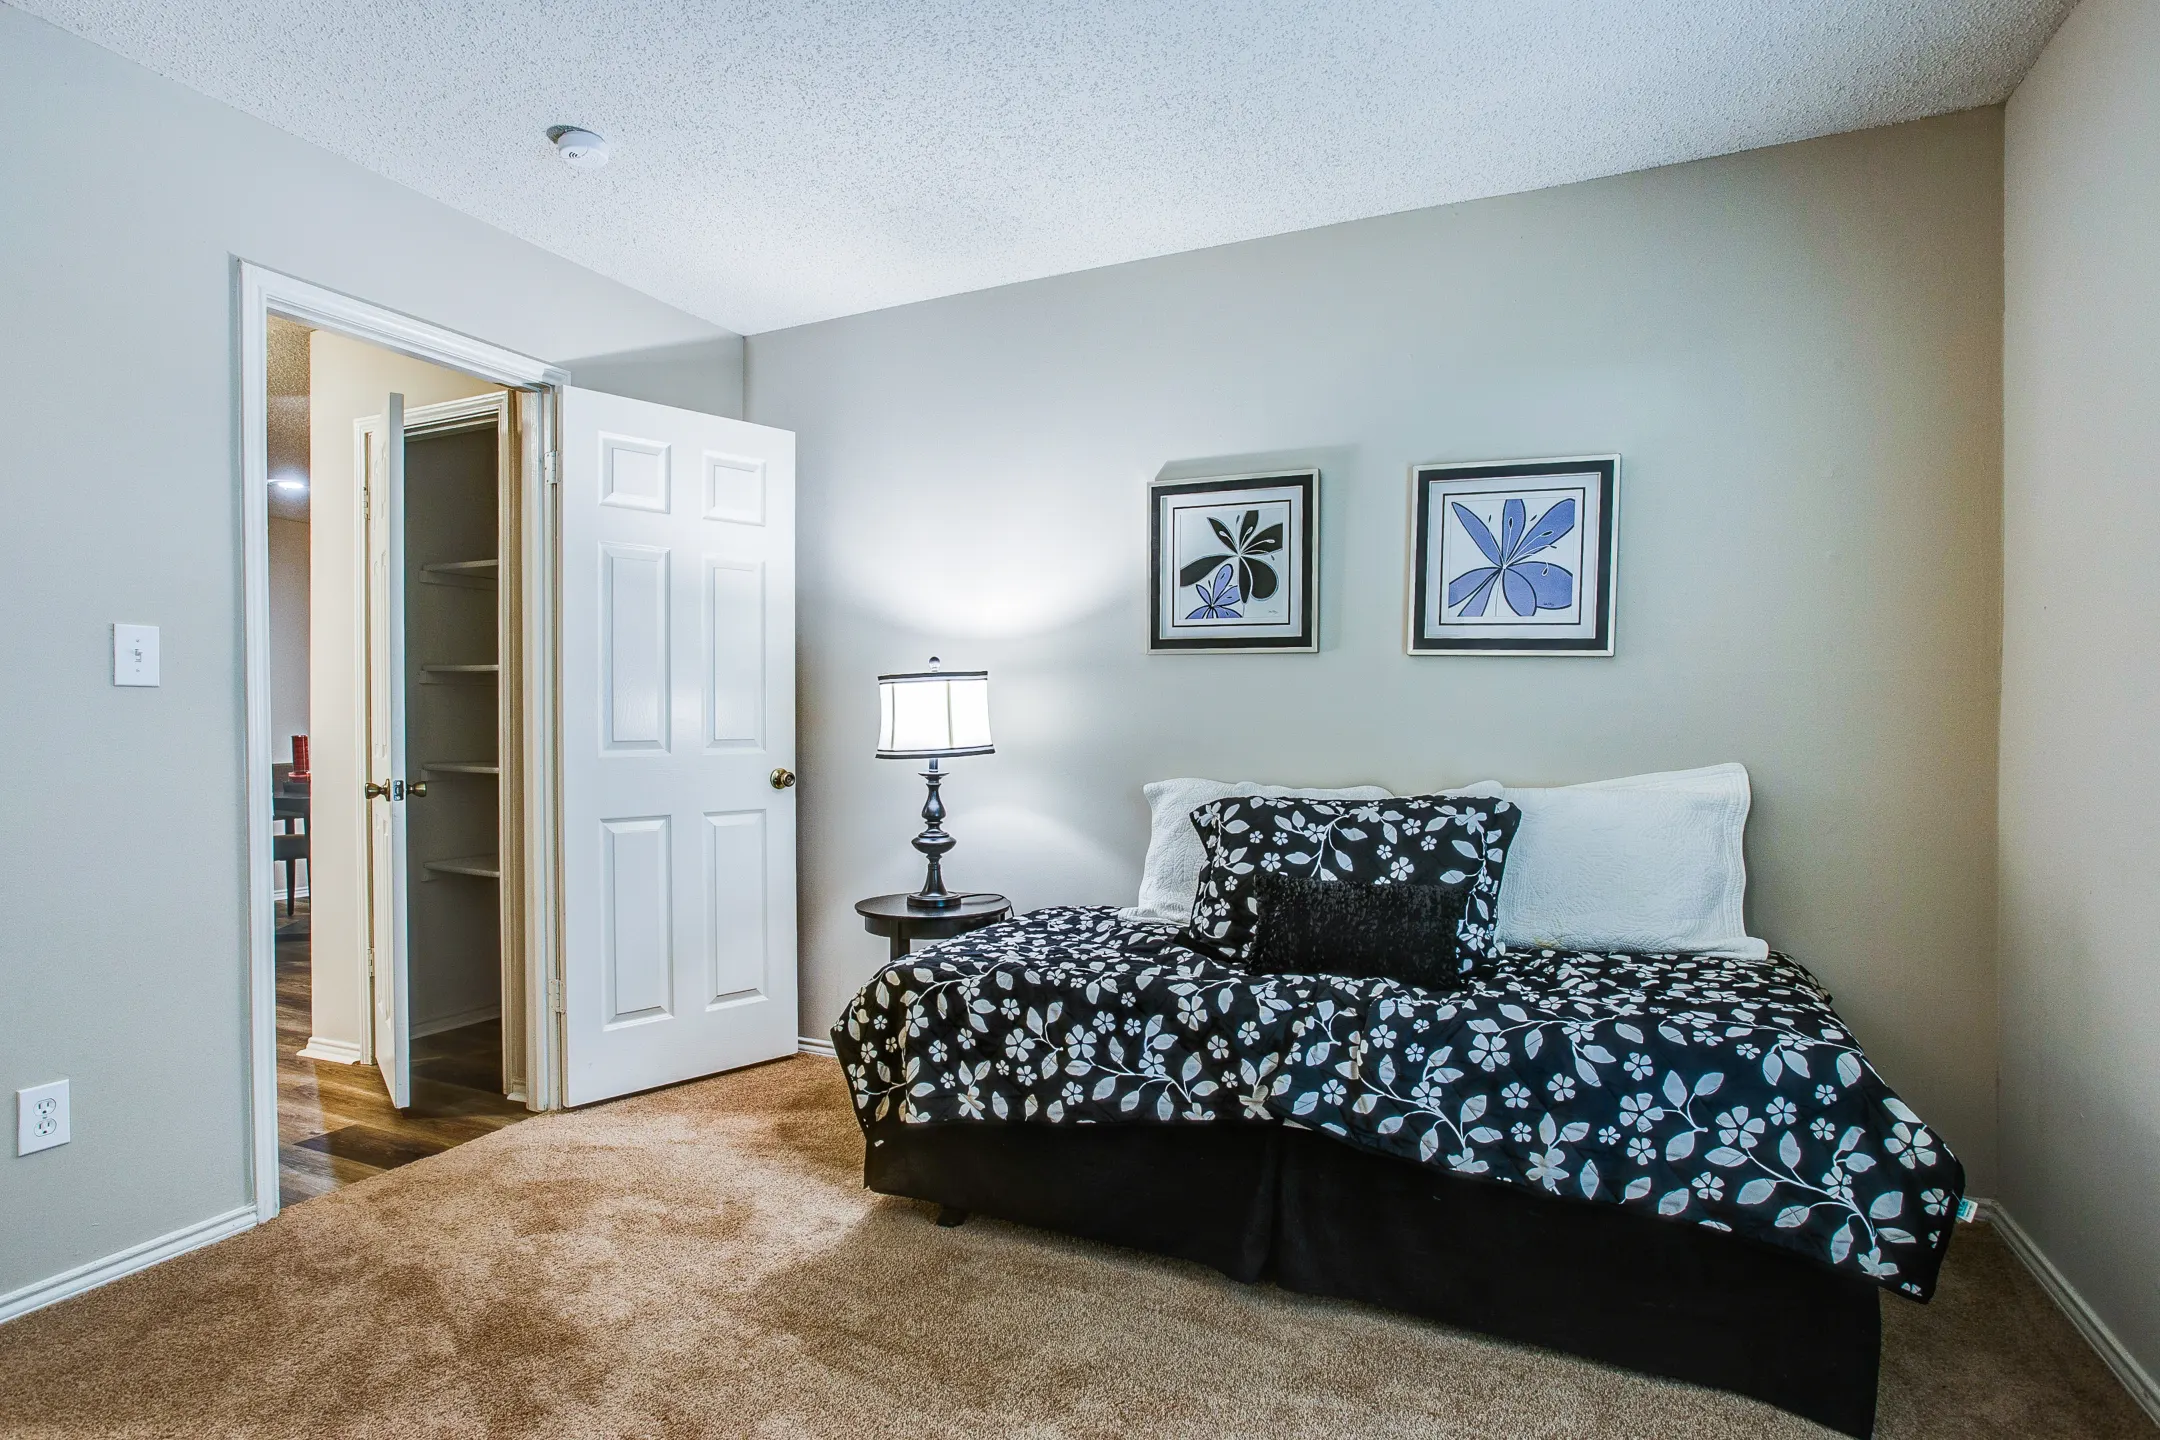 Bedroom - Baxter Crossings - Chesterfield, MO